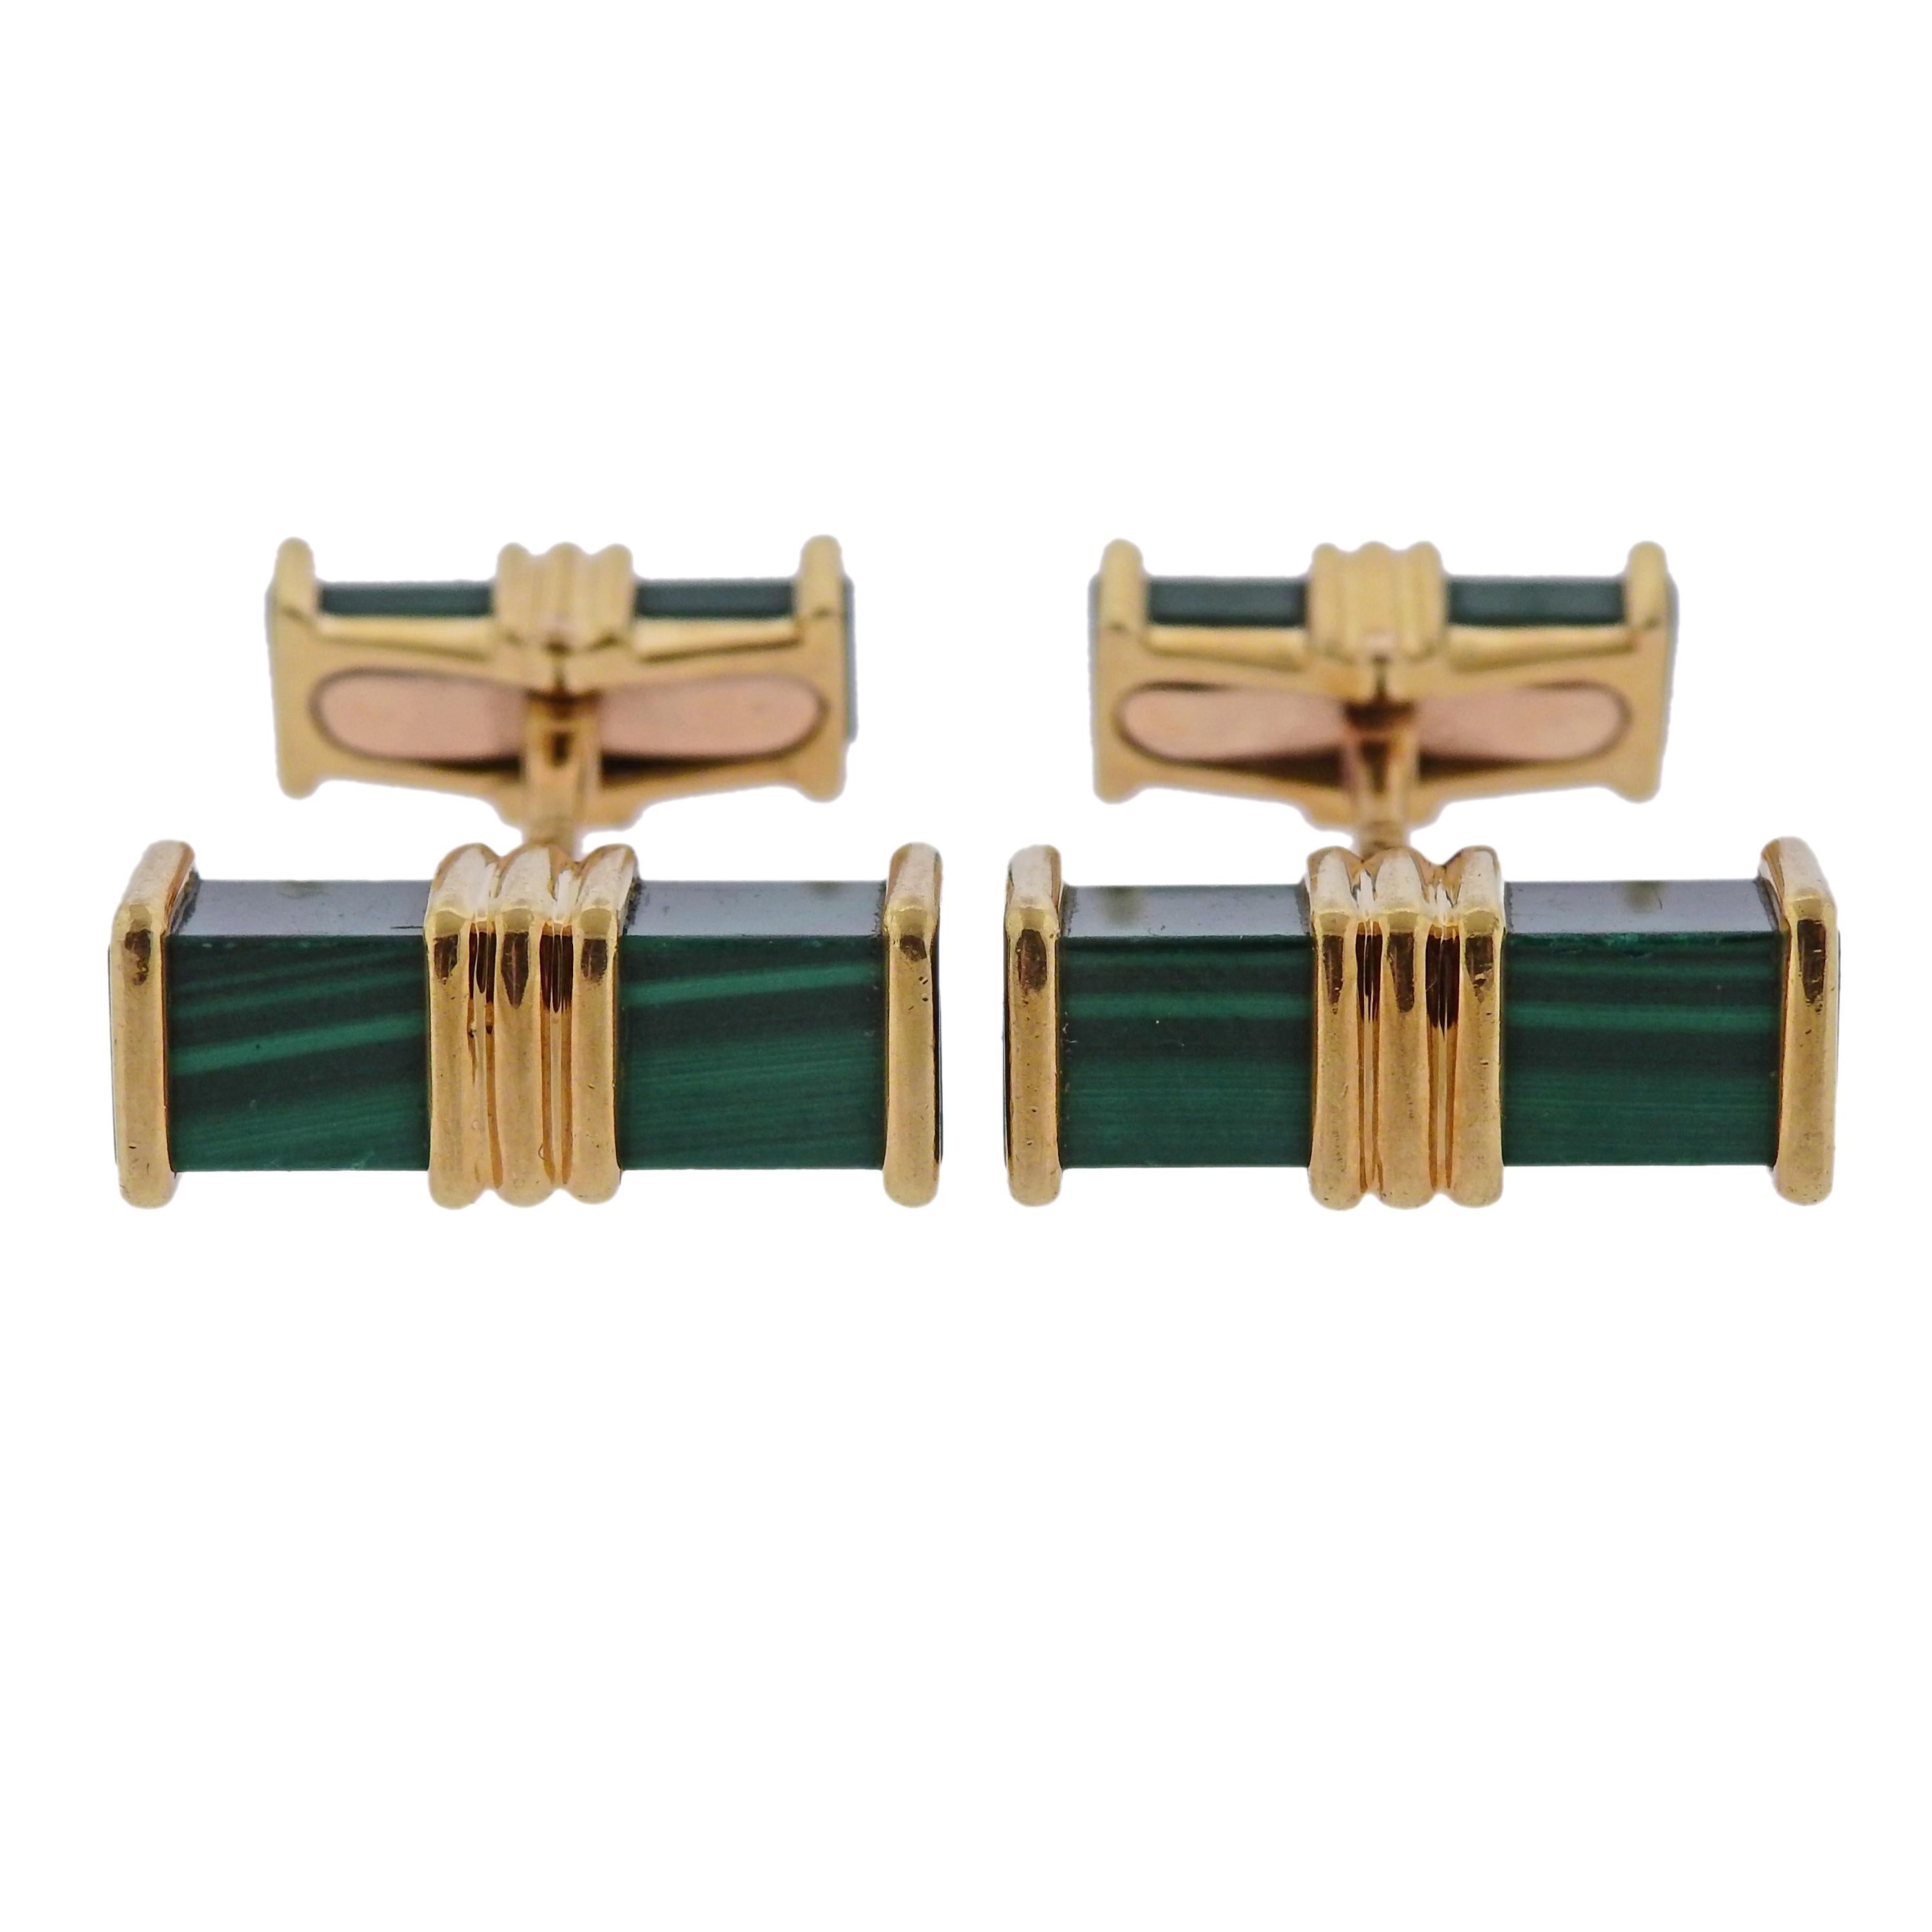 Pair of 18k yellow gold cufflinks, crafted by Chaumet, with malachite stones. Cufflink top measures 20mm x 7mm, back - 15mm x 5mm, weigh 18.4 grams. Marked:  Chaumet, 750, 23548.